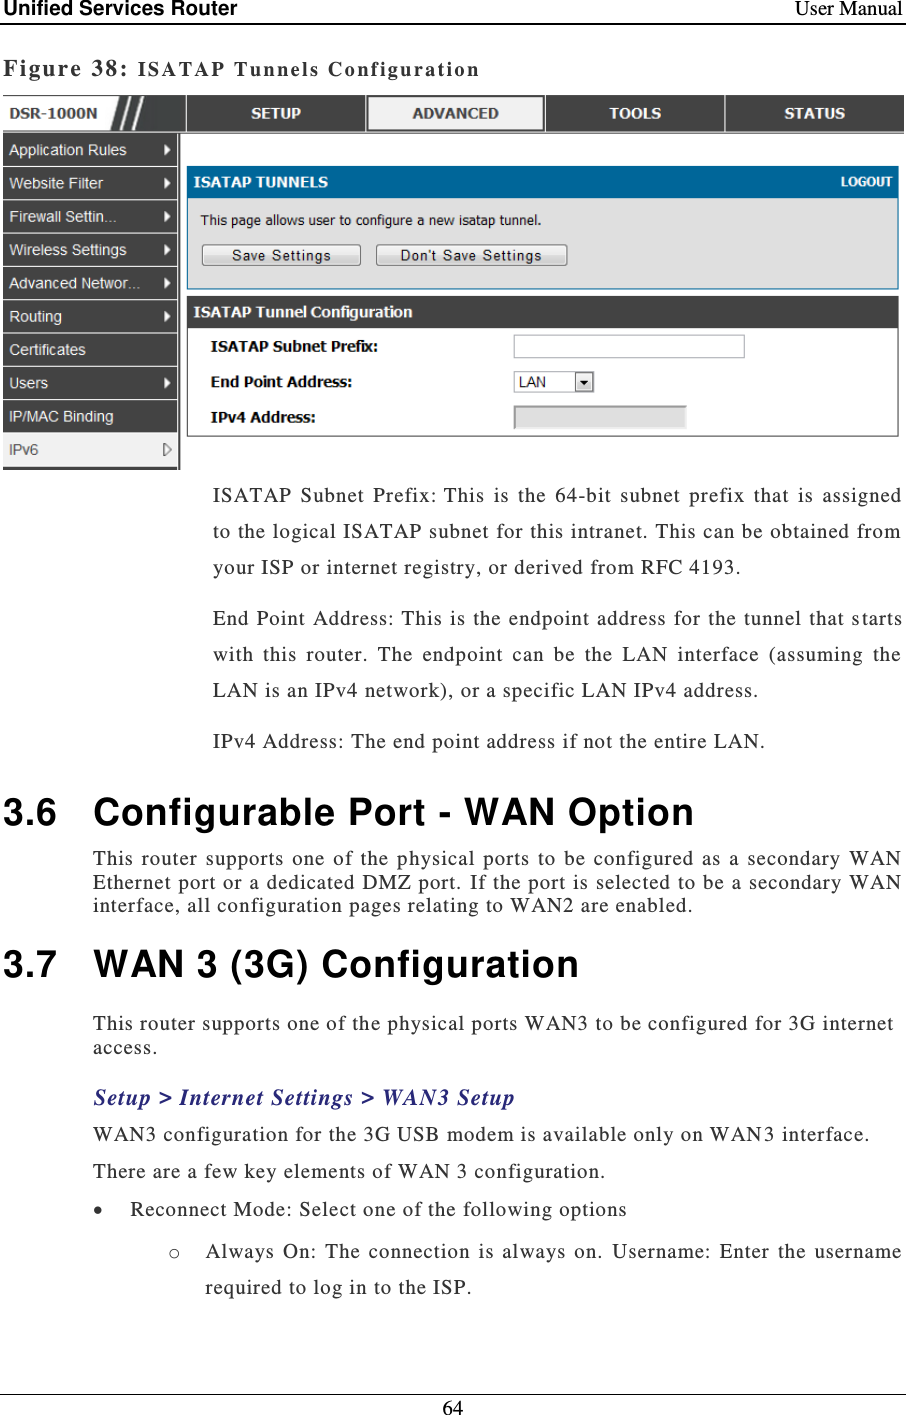 Unified Services Router    User Manual 64  Figure 38: IS A T AP   Tunnel s   C o nf iguration   ISATAP  Subnet  Prefix: This  is  the  64-bit  subnet  prefix  that  is  assigned to the logical ISATAP subnet for this intranet. This can be obtained from your ISP or internet registry, or derived from RFC 4193.  End  Point Address: This is the  endpoint address for  the tunnel that s tarts with  this  router.  The  endpoint  can  be  the  LAN  interface  (assuming  the LAN is an IPv4 network), or a specific LAN IPv4 address.  IPv4 Address: The end point address if not the entire LAN.  3.6  Configurable Port - WAN Option This  router  supports  one  of  the  physical  ports  to  be  configured  as  a  secondary  WAN Ethernet port or a dedicated DMZ port.  If the port is selected to be a secondary  WAN interface, all configuration pages relating to WAN2 are enabled.   3.7  WAN 3 (3G) Configuration This router supports one of the physical ports WAN3 to be configured for 3G internet access. Setup &gt; Internet Settings &gt; WAN3 Setup WAN3 configuration for the 3G USB modem is available only on WAN 3 interface. There are a few key elements of WAN 3 configuration.   Reconnect Mode: Select one of the following options o Always  On:  The  connection  is  always  on.  Username:  Enter  the  username required to log in to the ISP. 